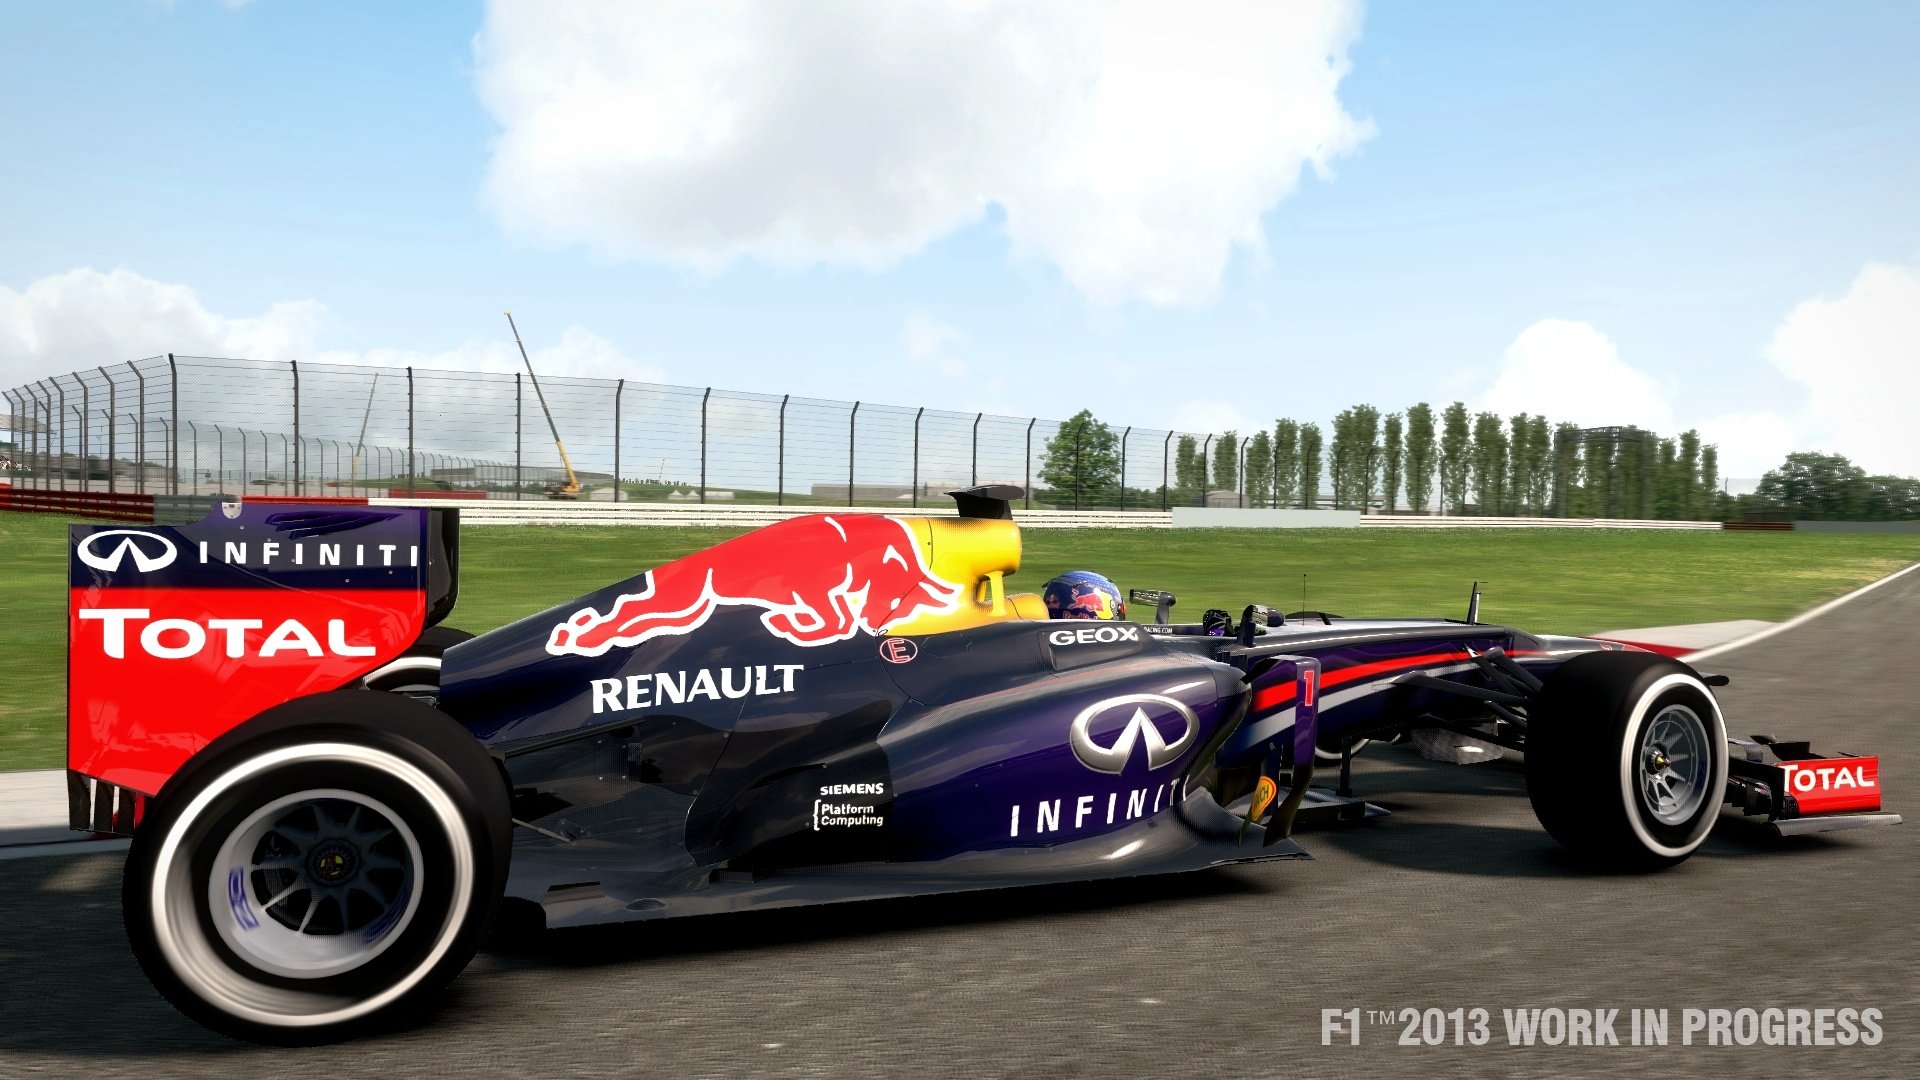 F1 2013 (PS3 / PlayStation 3) Game Profile | News, Reviews, Videos ...